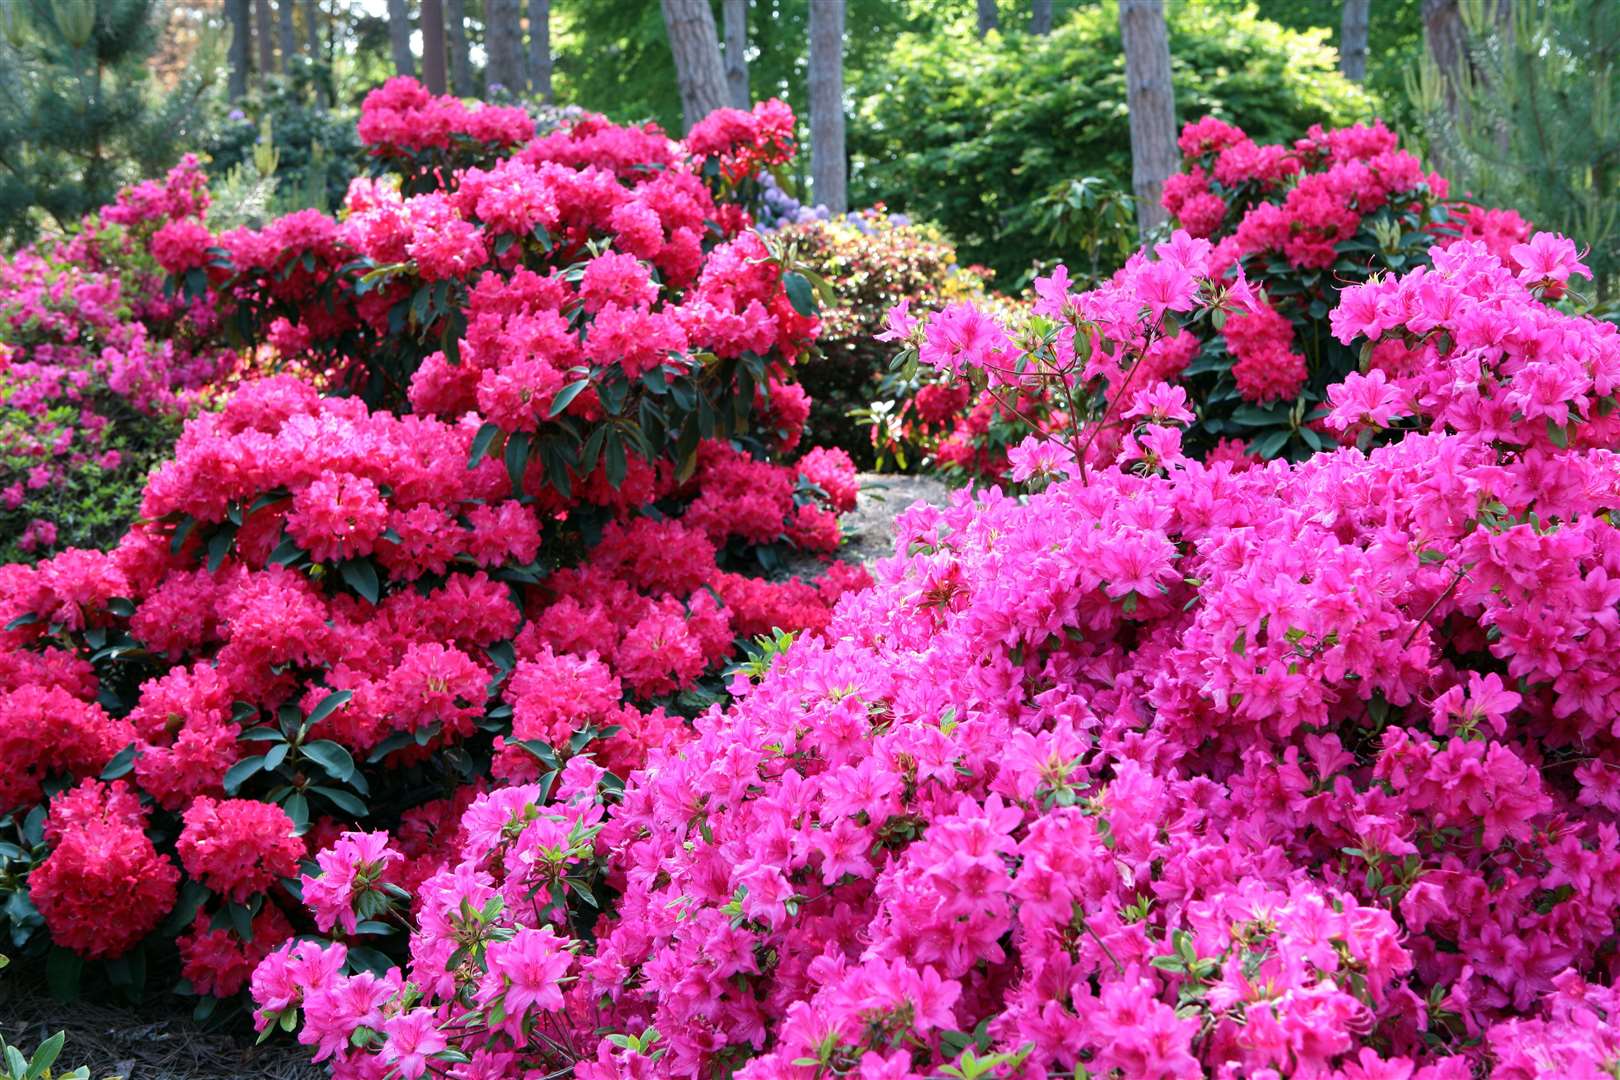 Rhododendrons add a blast of dayglo florescence to shady areas.